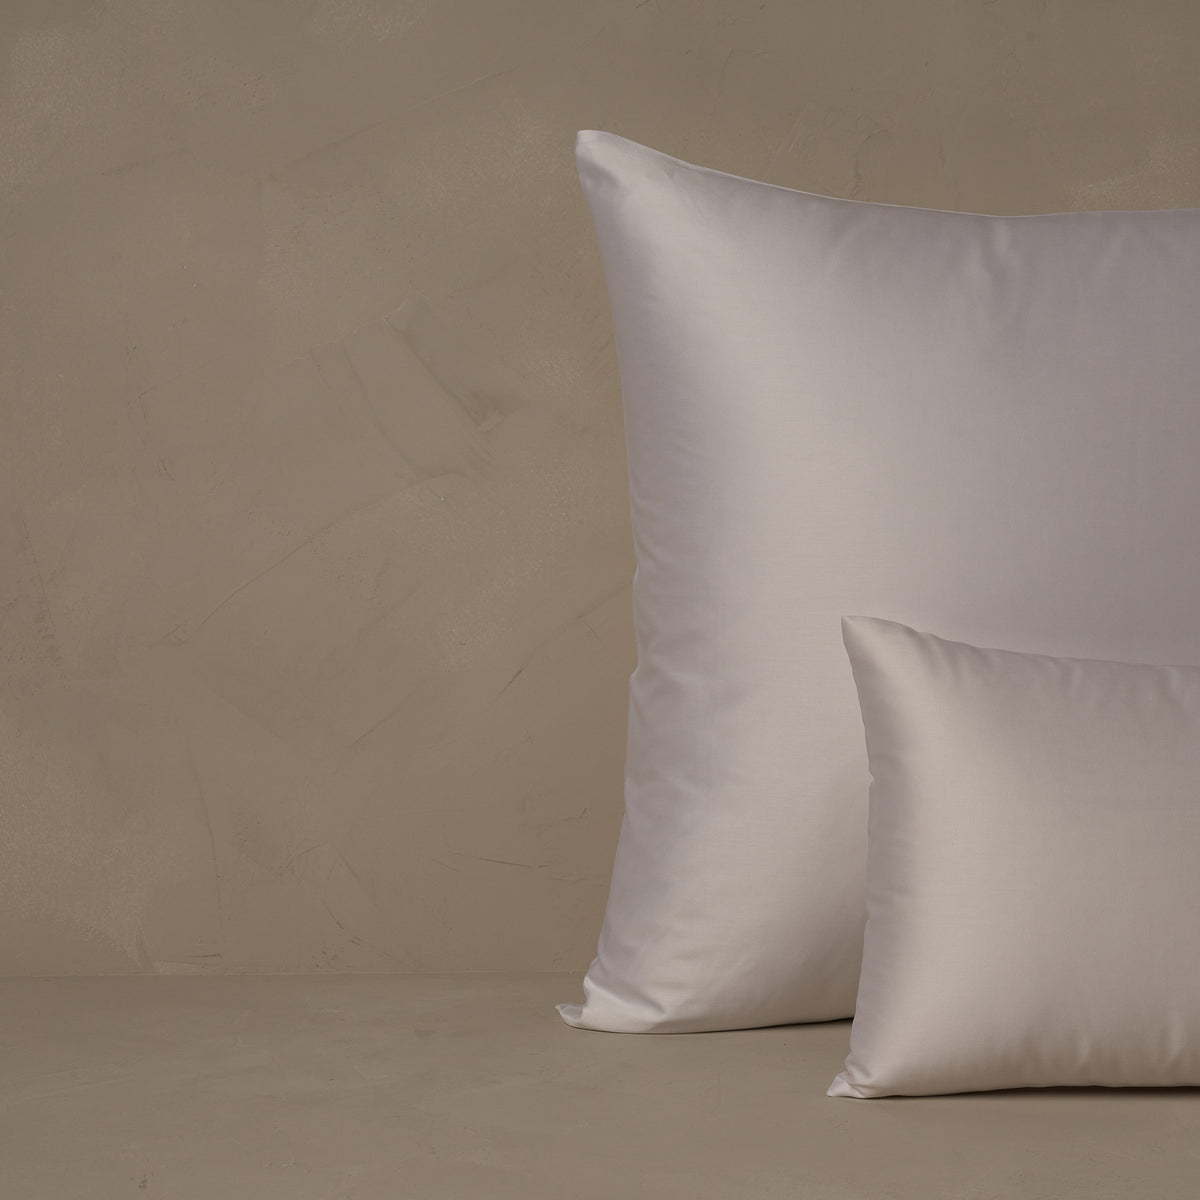 An image of a small boudoir or travel size pillow stacked in front of a large euro size pillow. The pillow cases are made in Italy of buttery and transcendent Sea Island Cotton Sateen in color white. data-image-id=